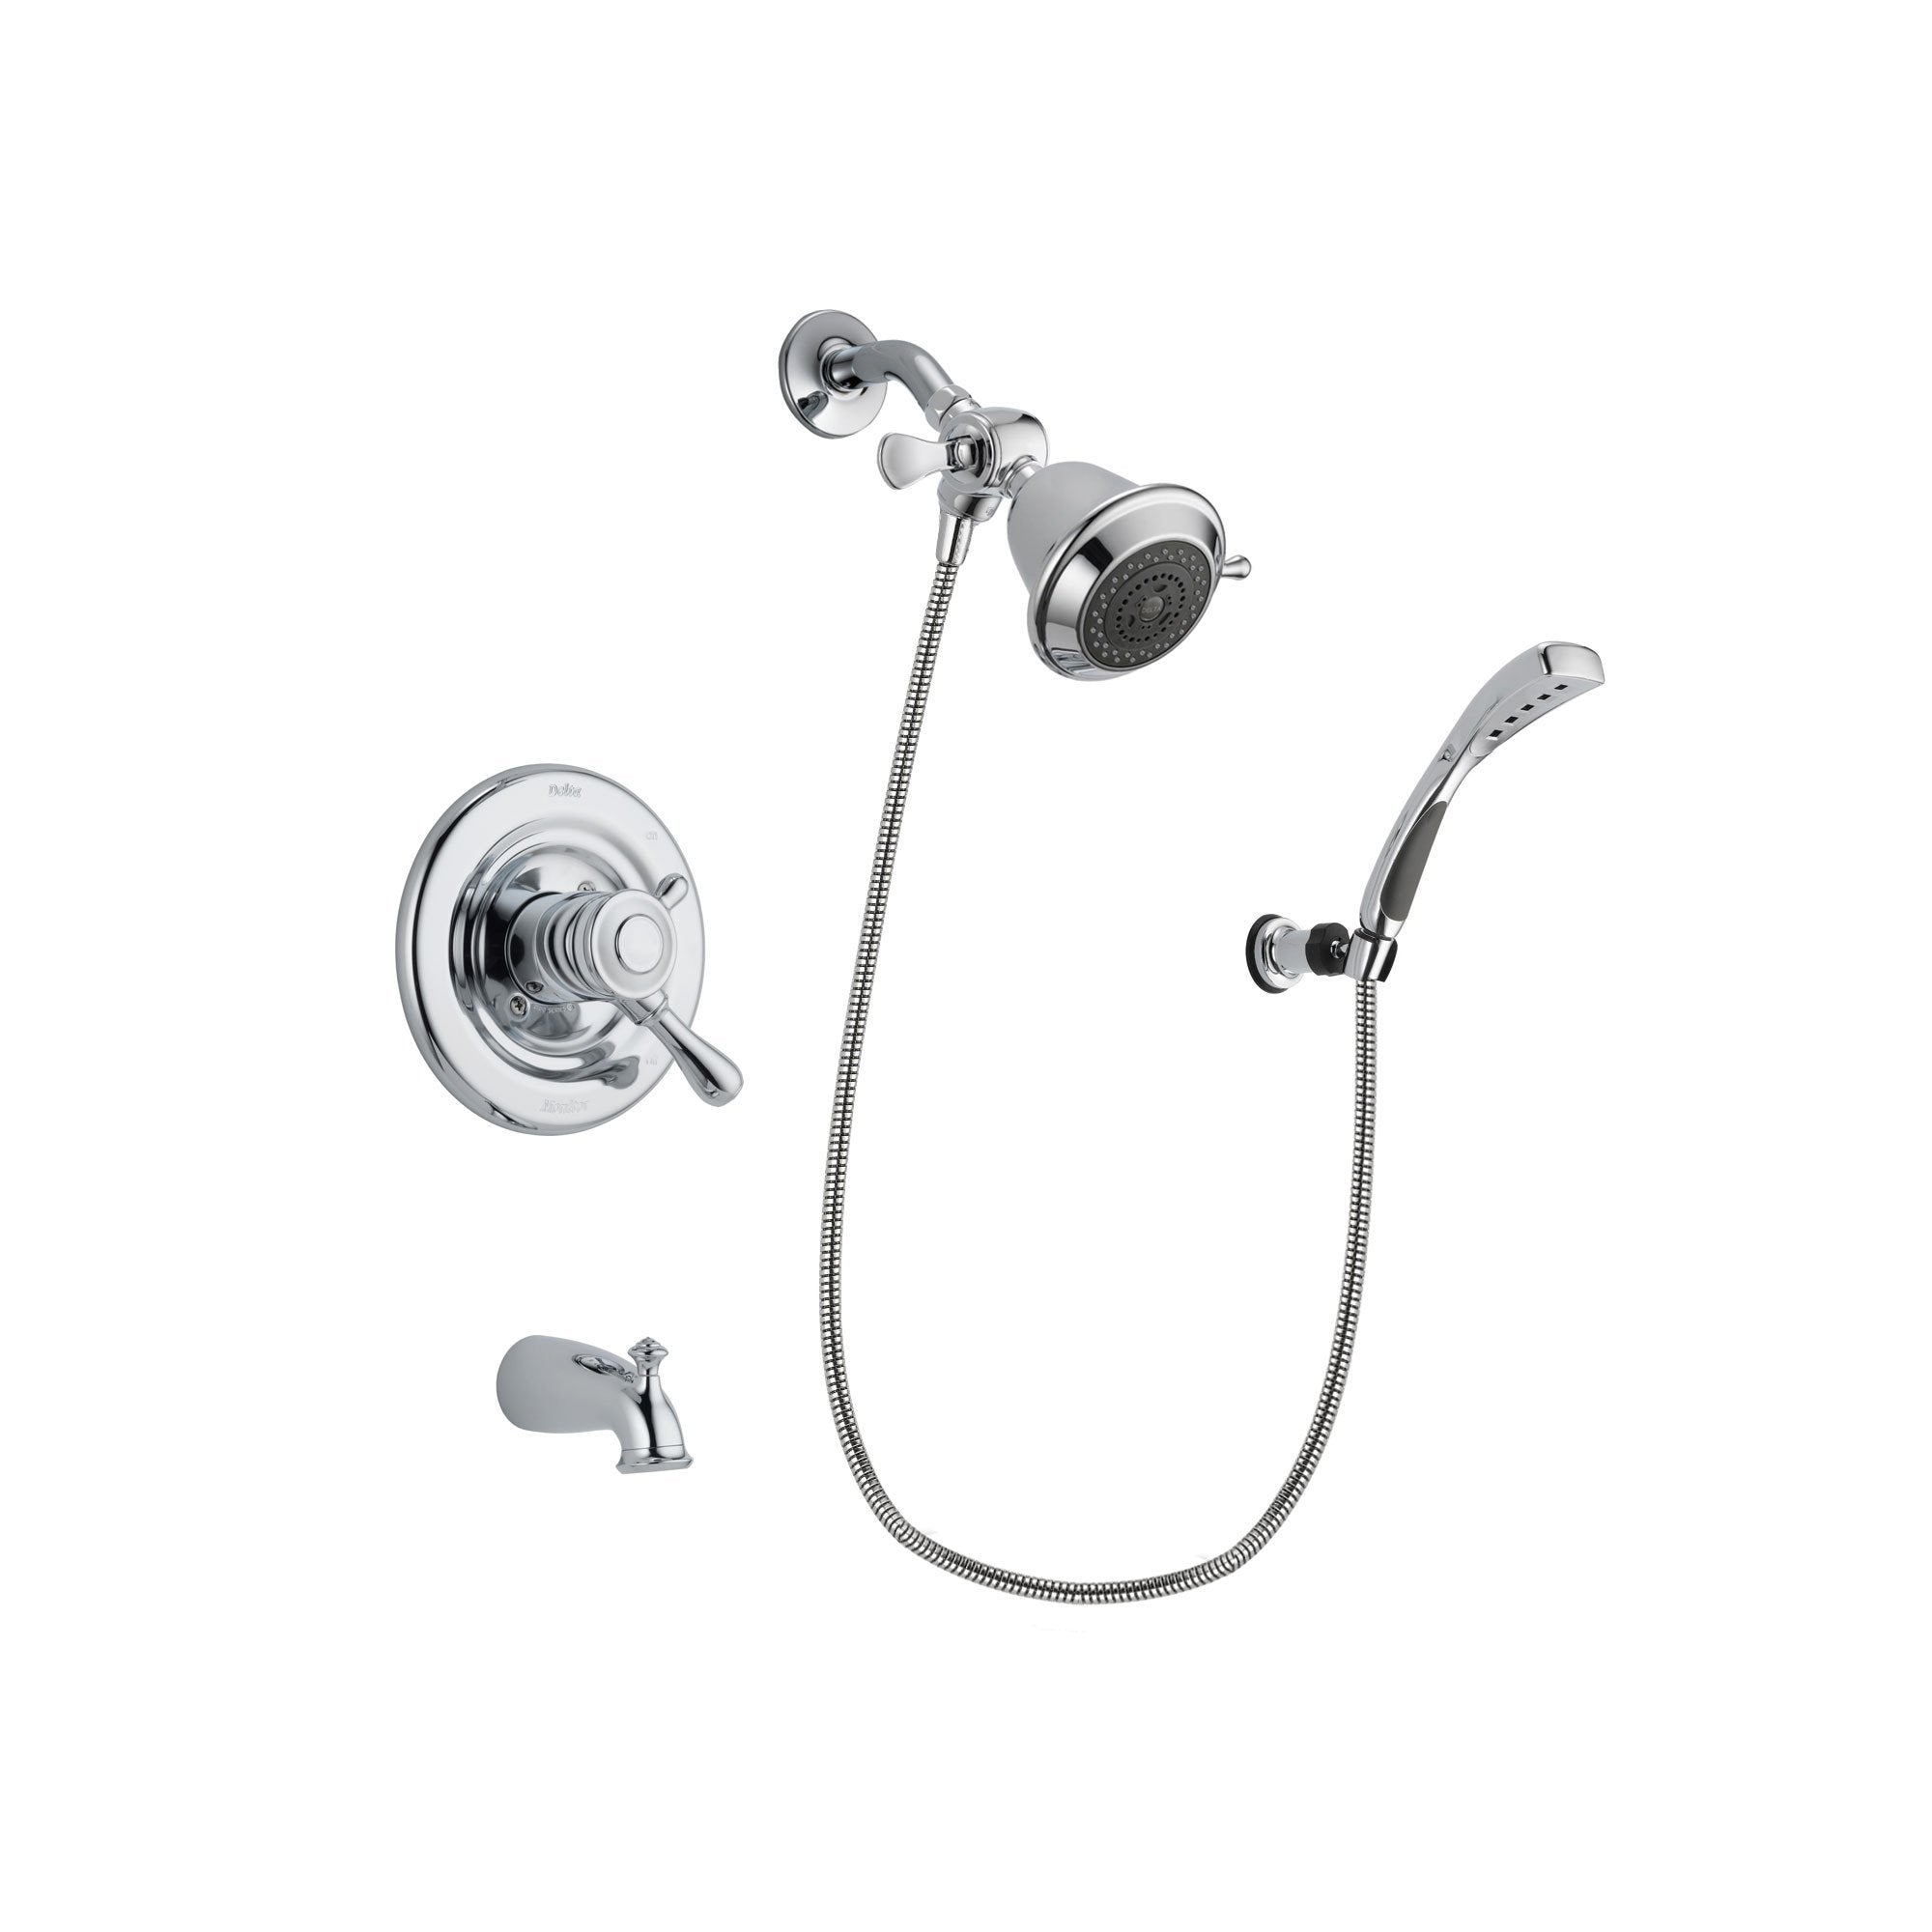 Delta Leland Chrome Finish Dual Control Tub and Shower Faucet System Package with Shower Head and Wall-Mount Bracket with Handheld Shower Spray Includes Rough-in Valve and Tub Spout DSP0995V